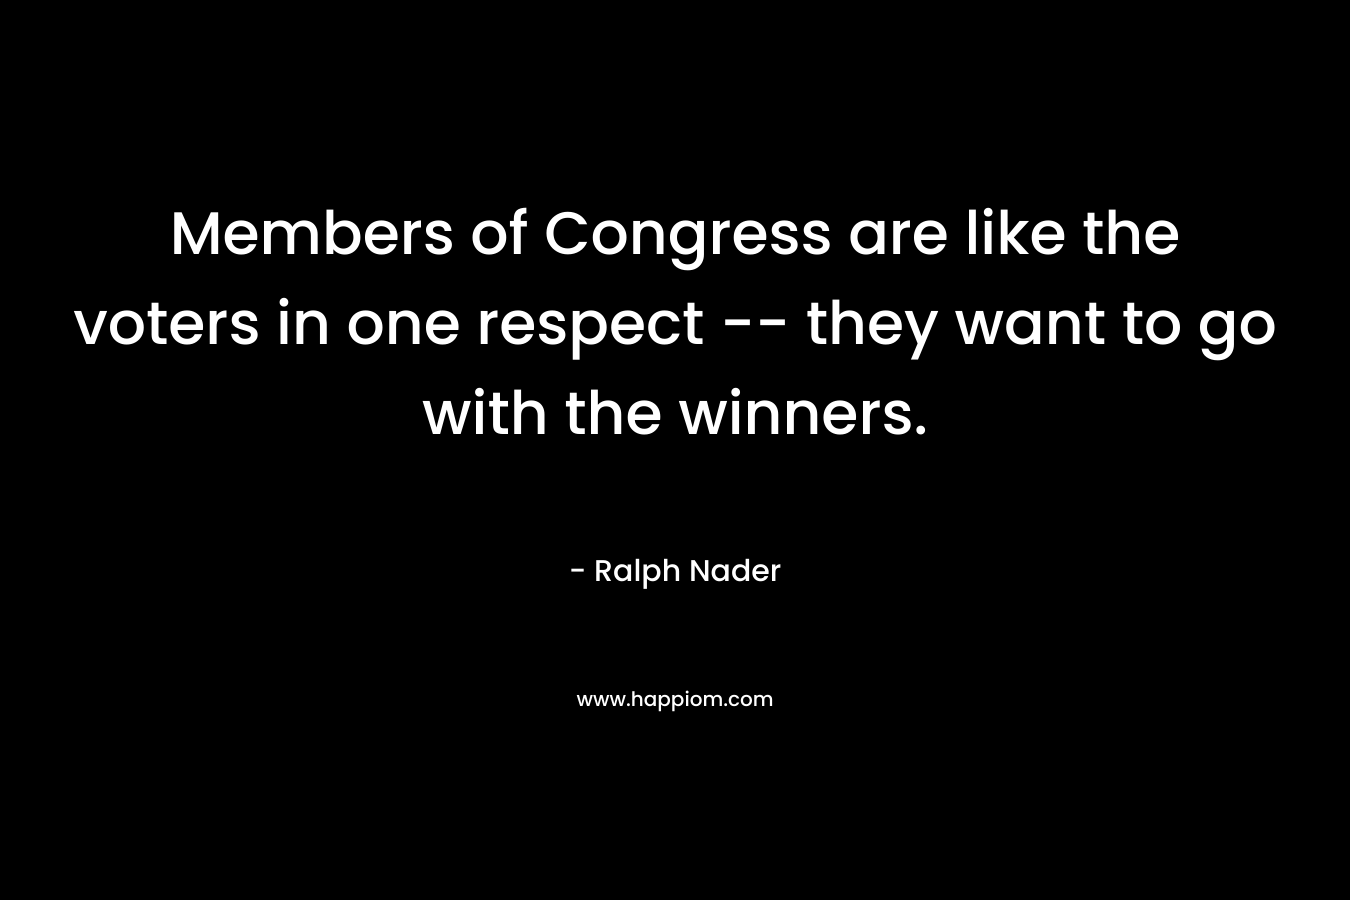 Members of Congress are like the voters in one respect -- they want to go with the winners.